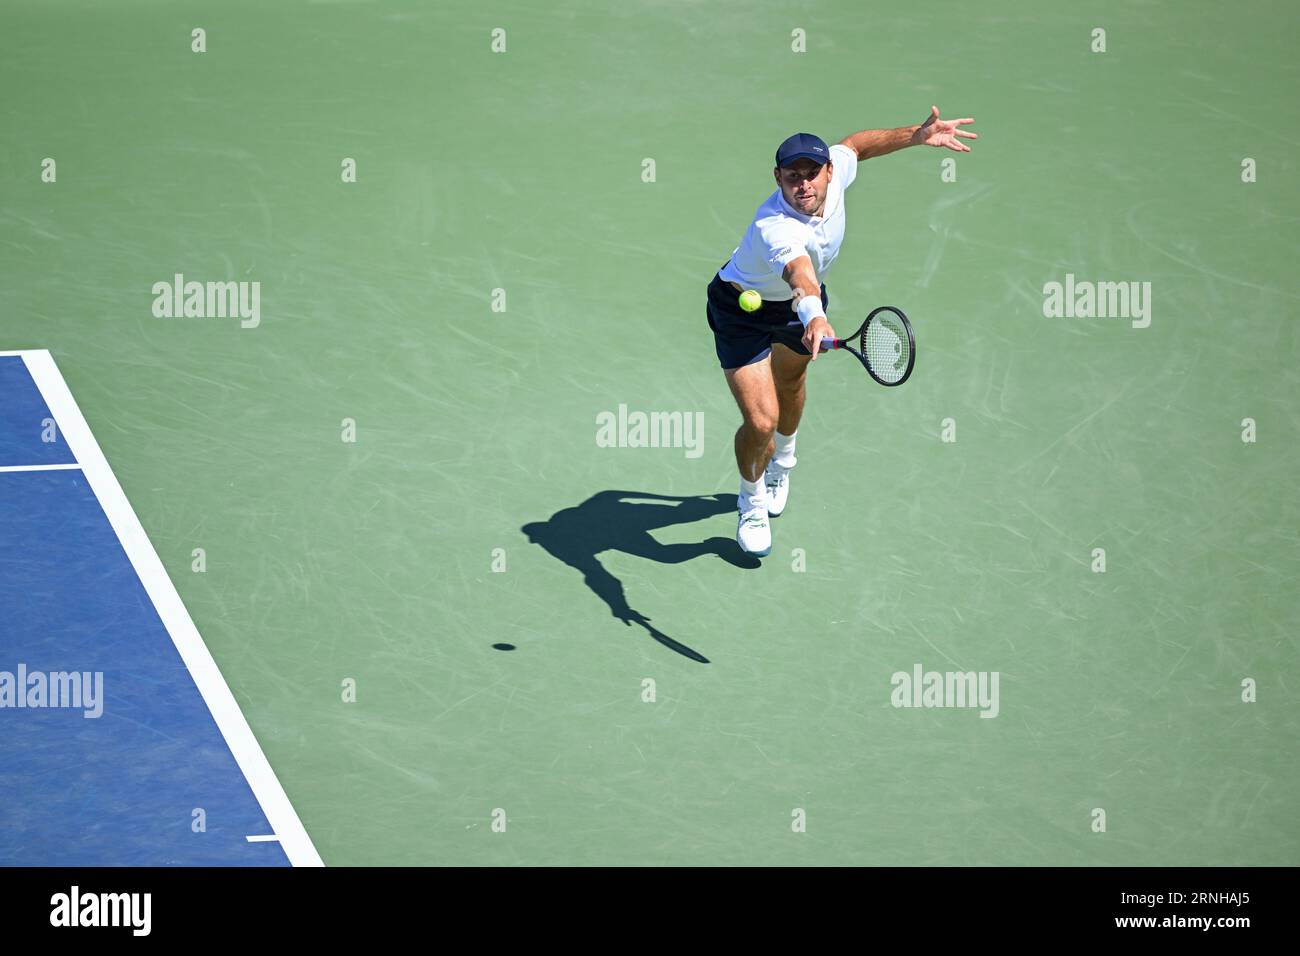 Aslan Karatsev in action during a mens singles match at the 2023 US Open, Friday, Sep